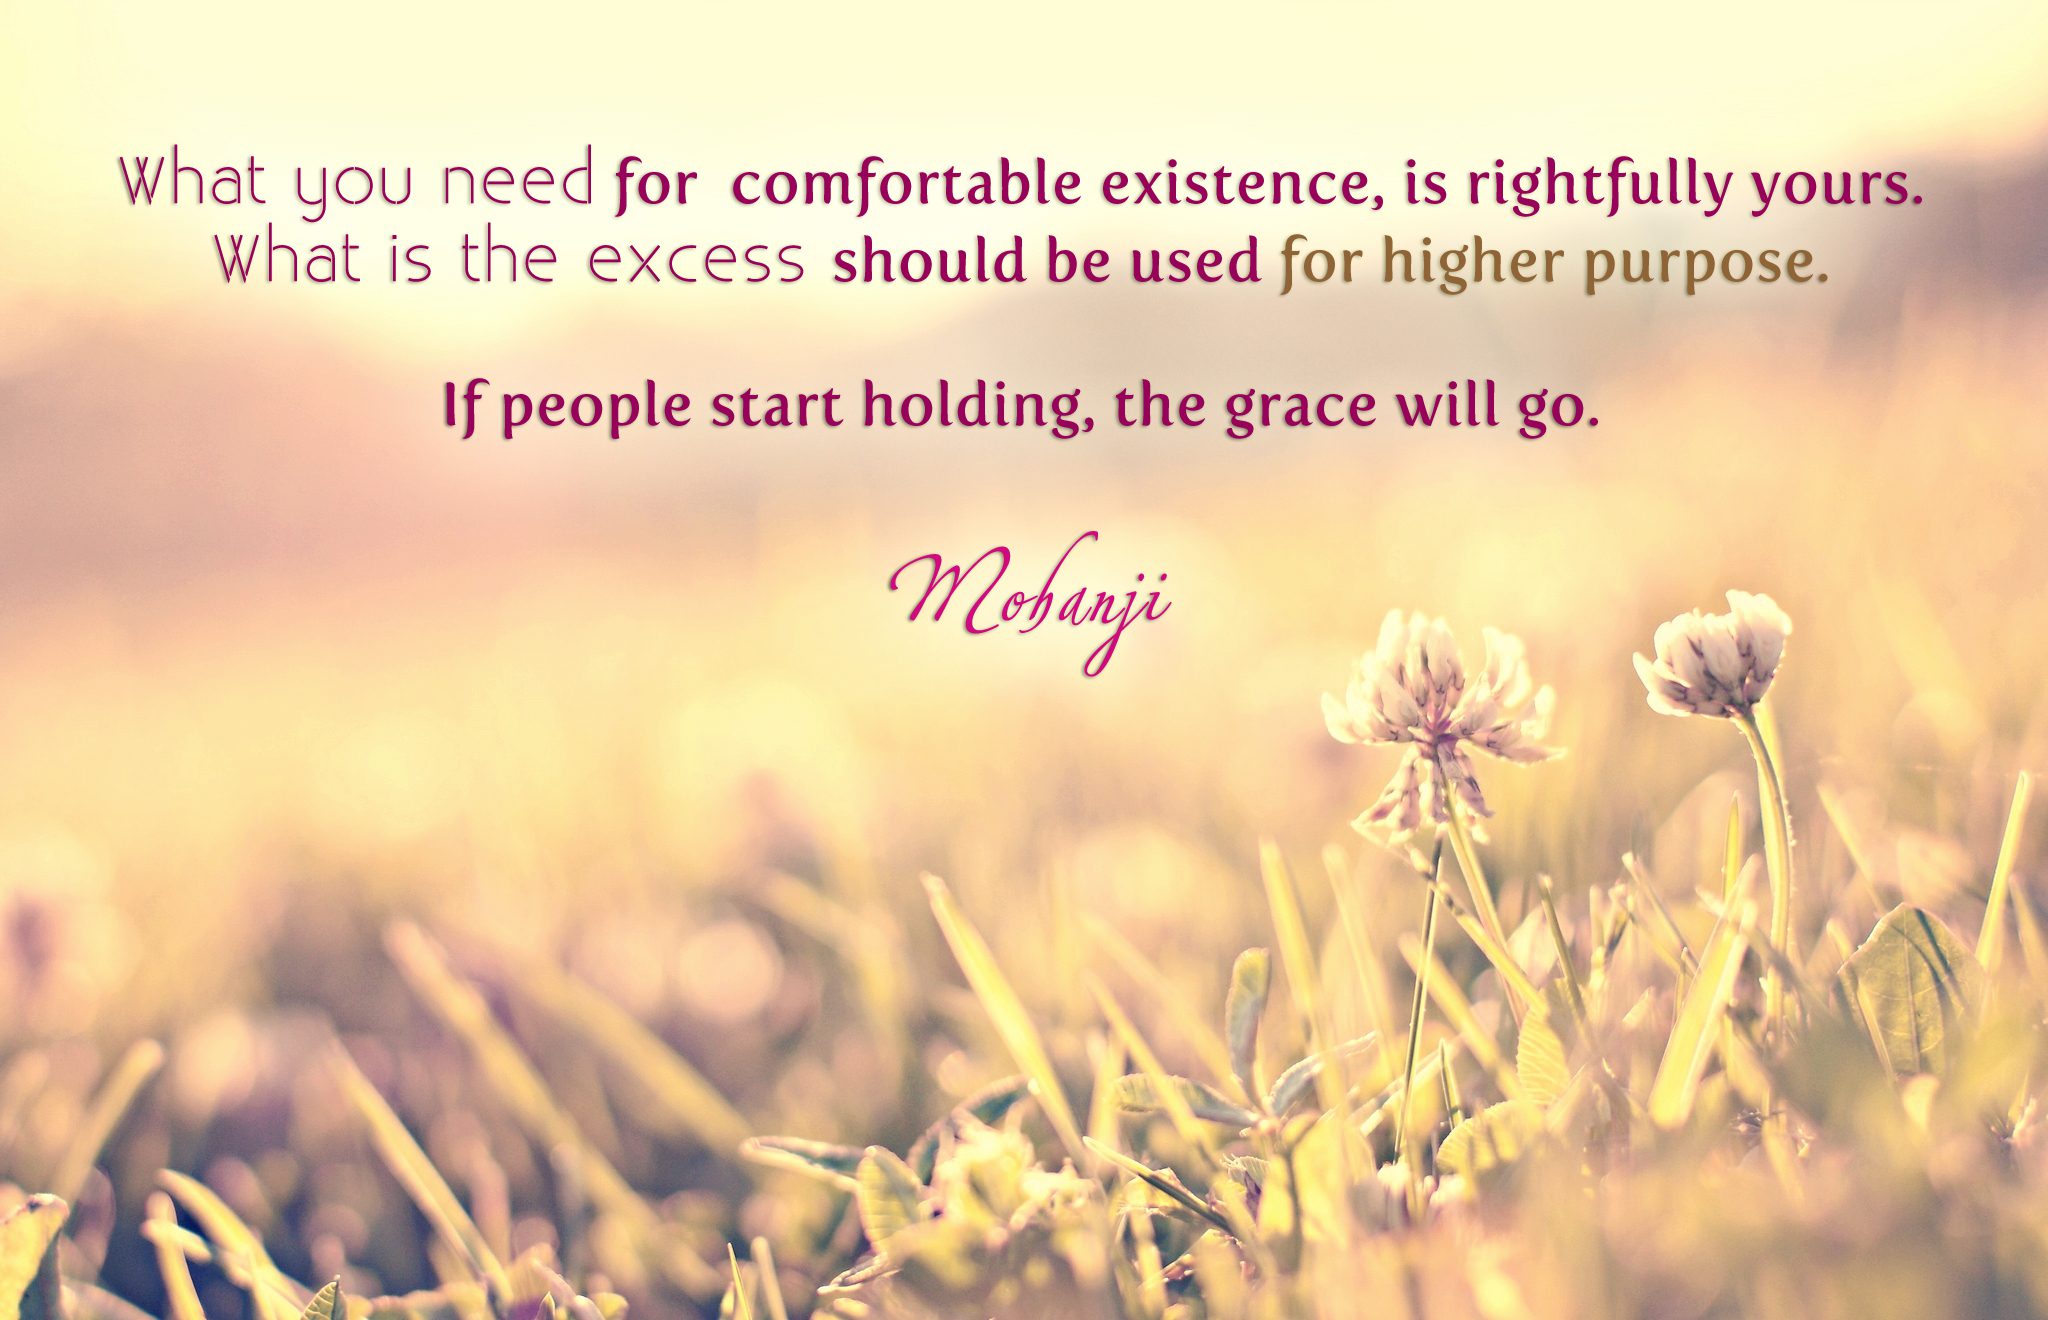 Mohanji quote - What you need for comfortable existence